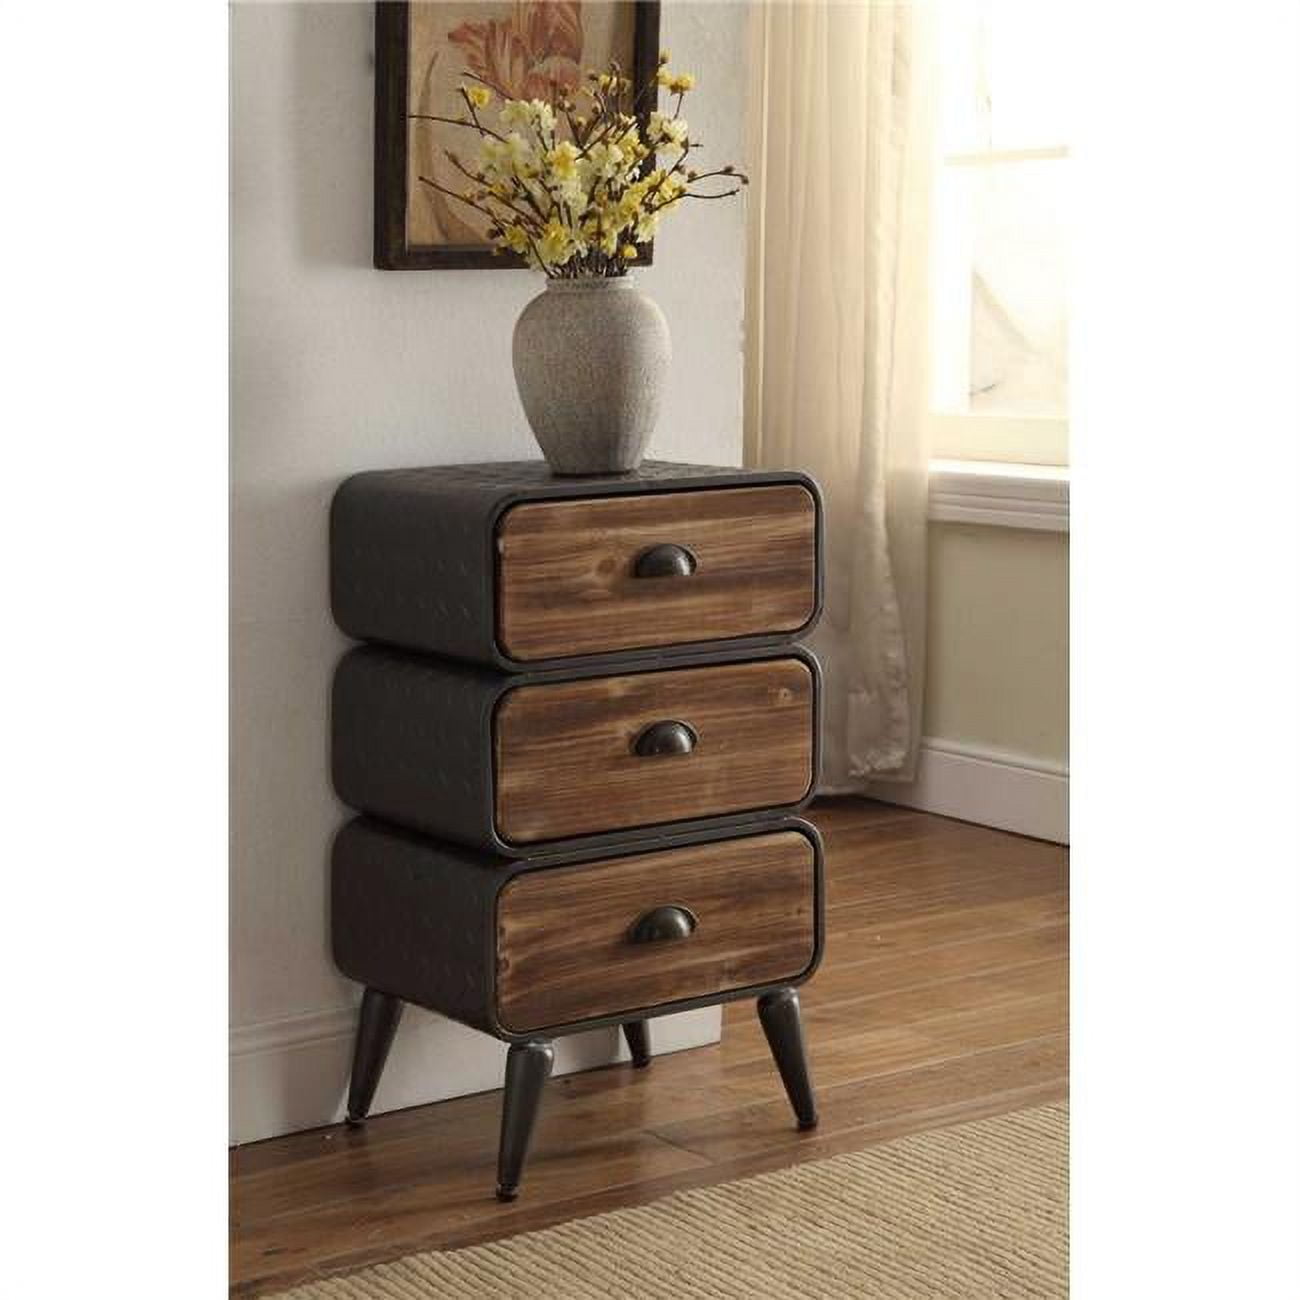 Picture of 4D Concepts 162017 3 Rounded Drawer Chest - Urban Loft, Metal & Rustic Natural Pine